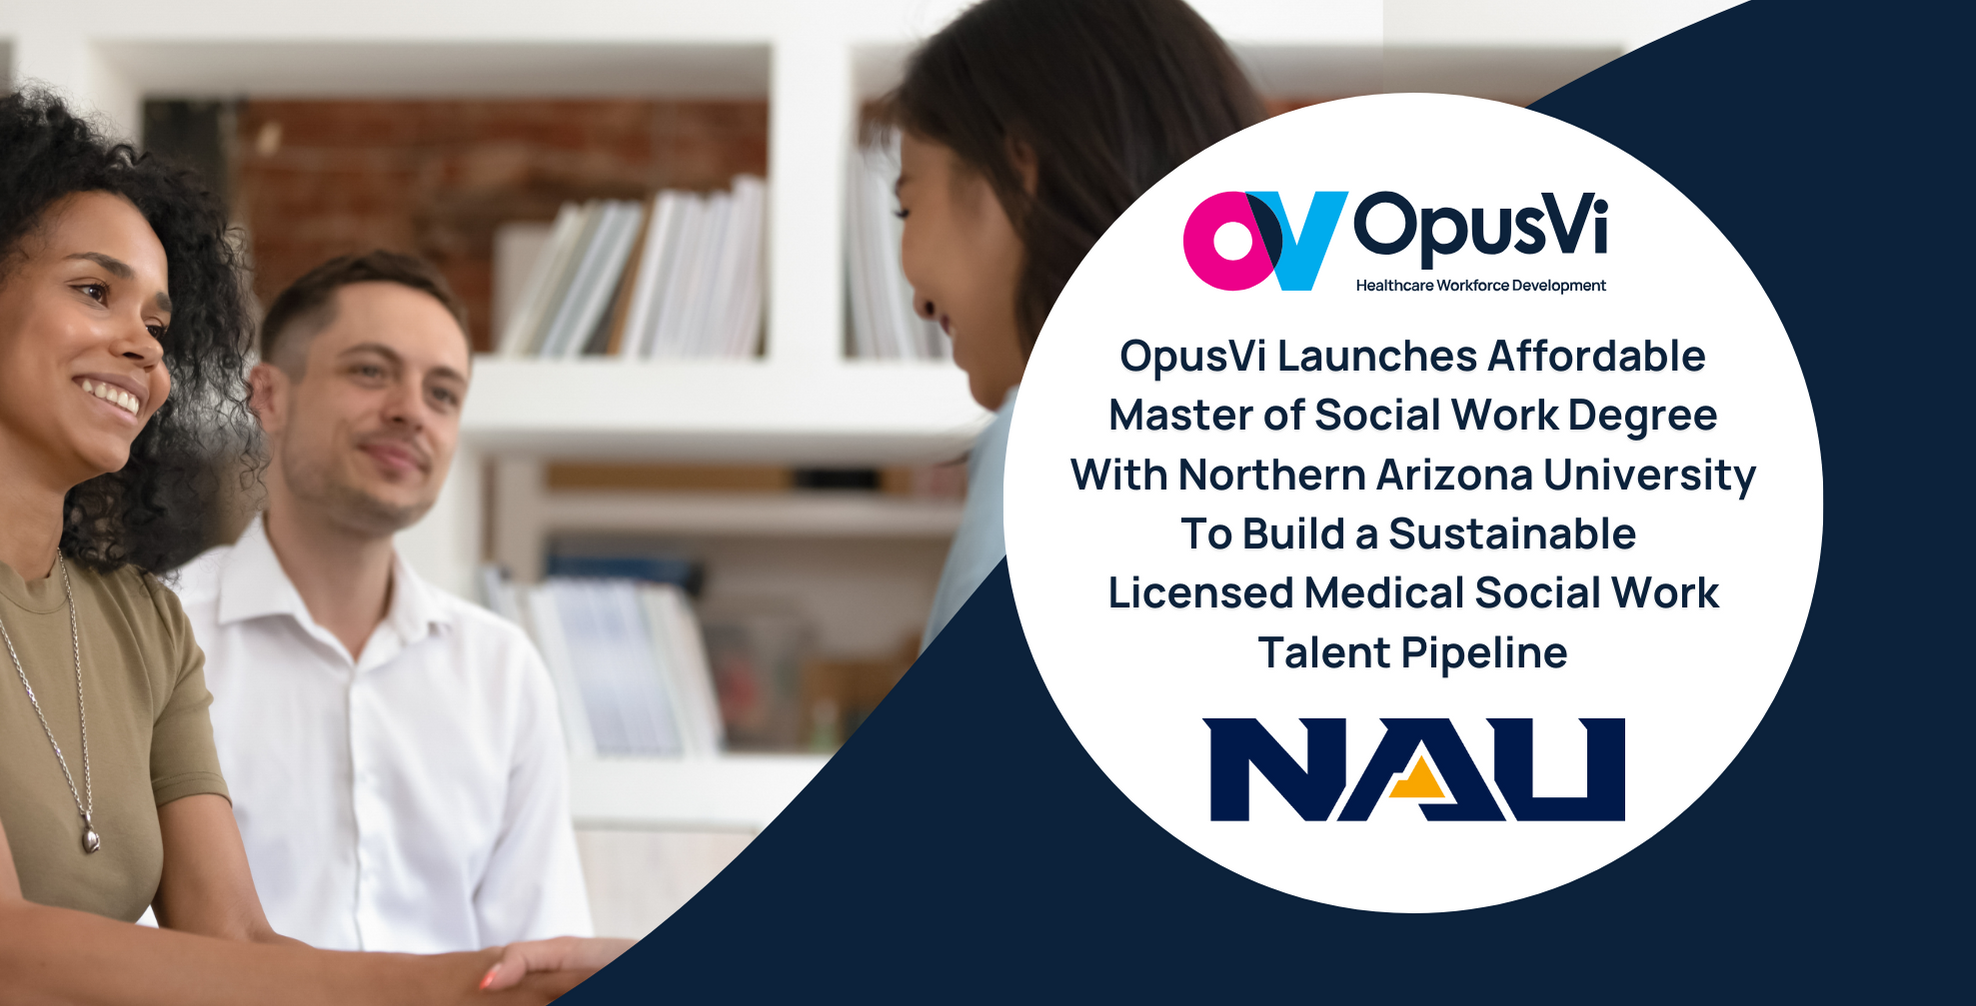 OpusVi Launches Affordable Online Master of Social Work Degree with Northern Arizona University To Build a Sustainable Talent Pipeline of Licensed Medical Social Work Professionals